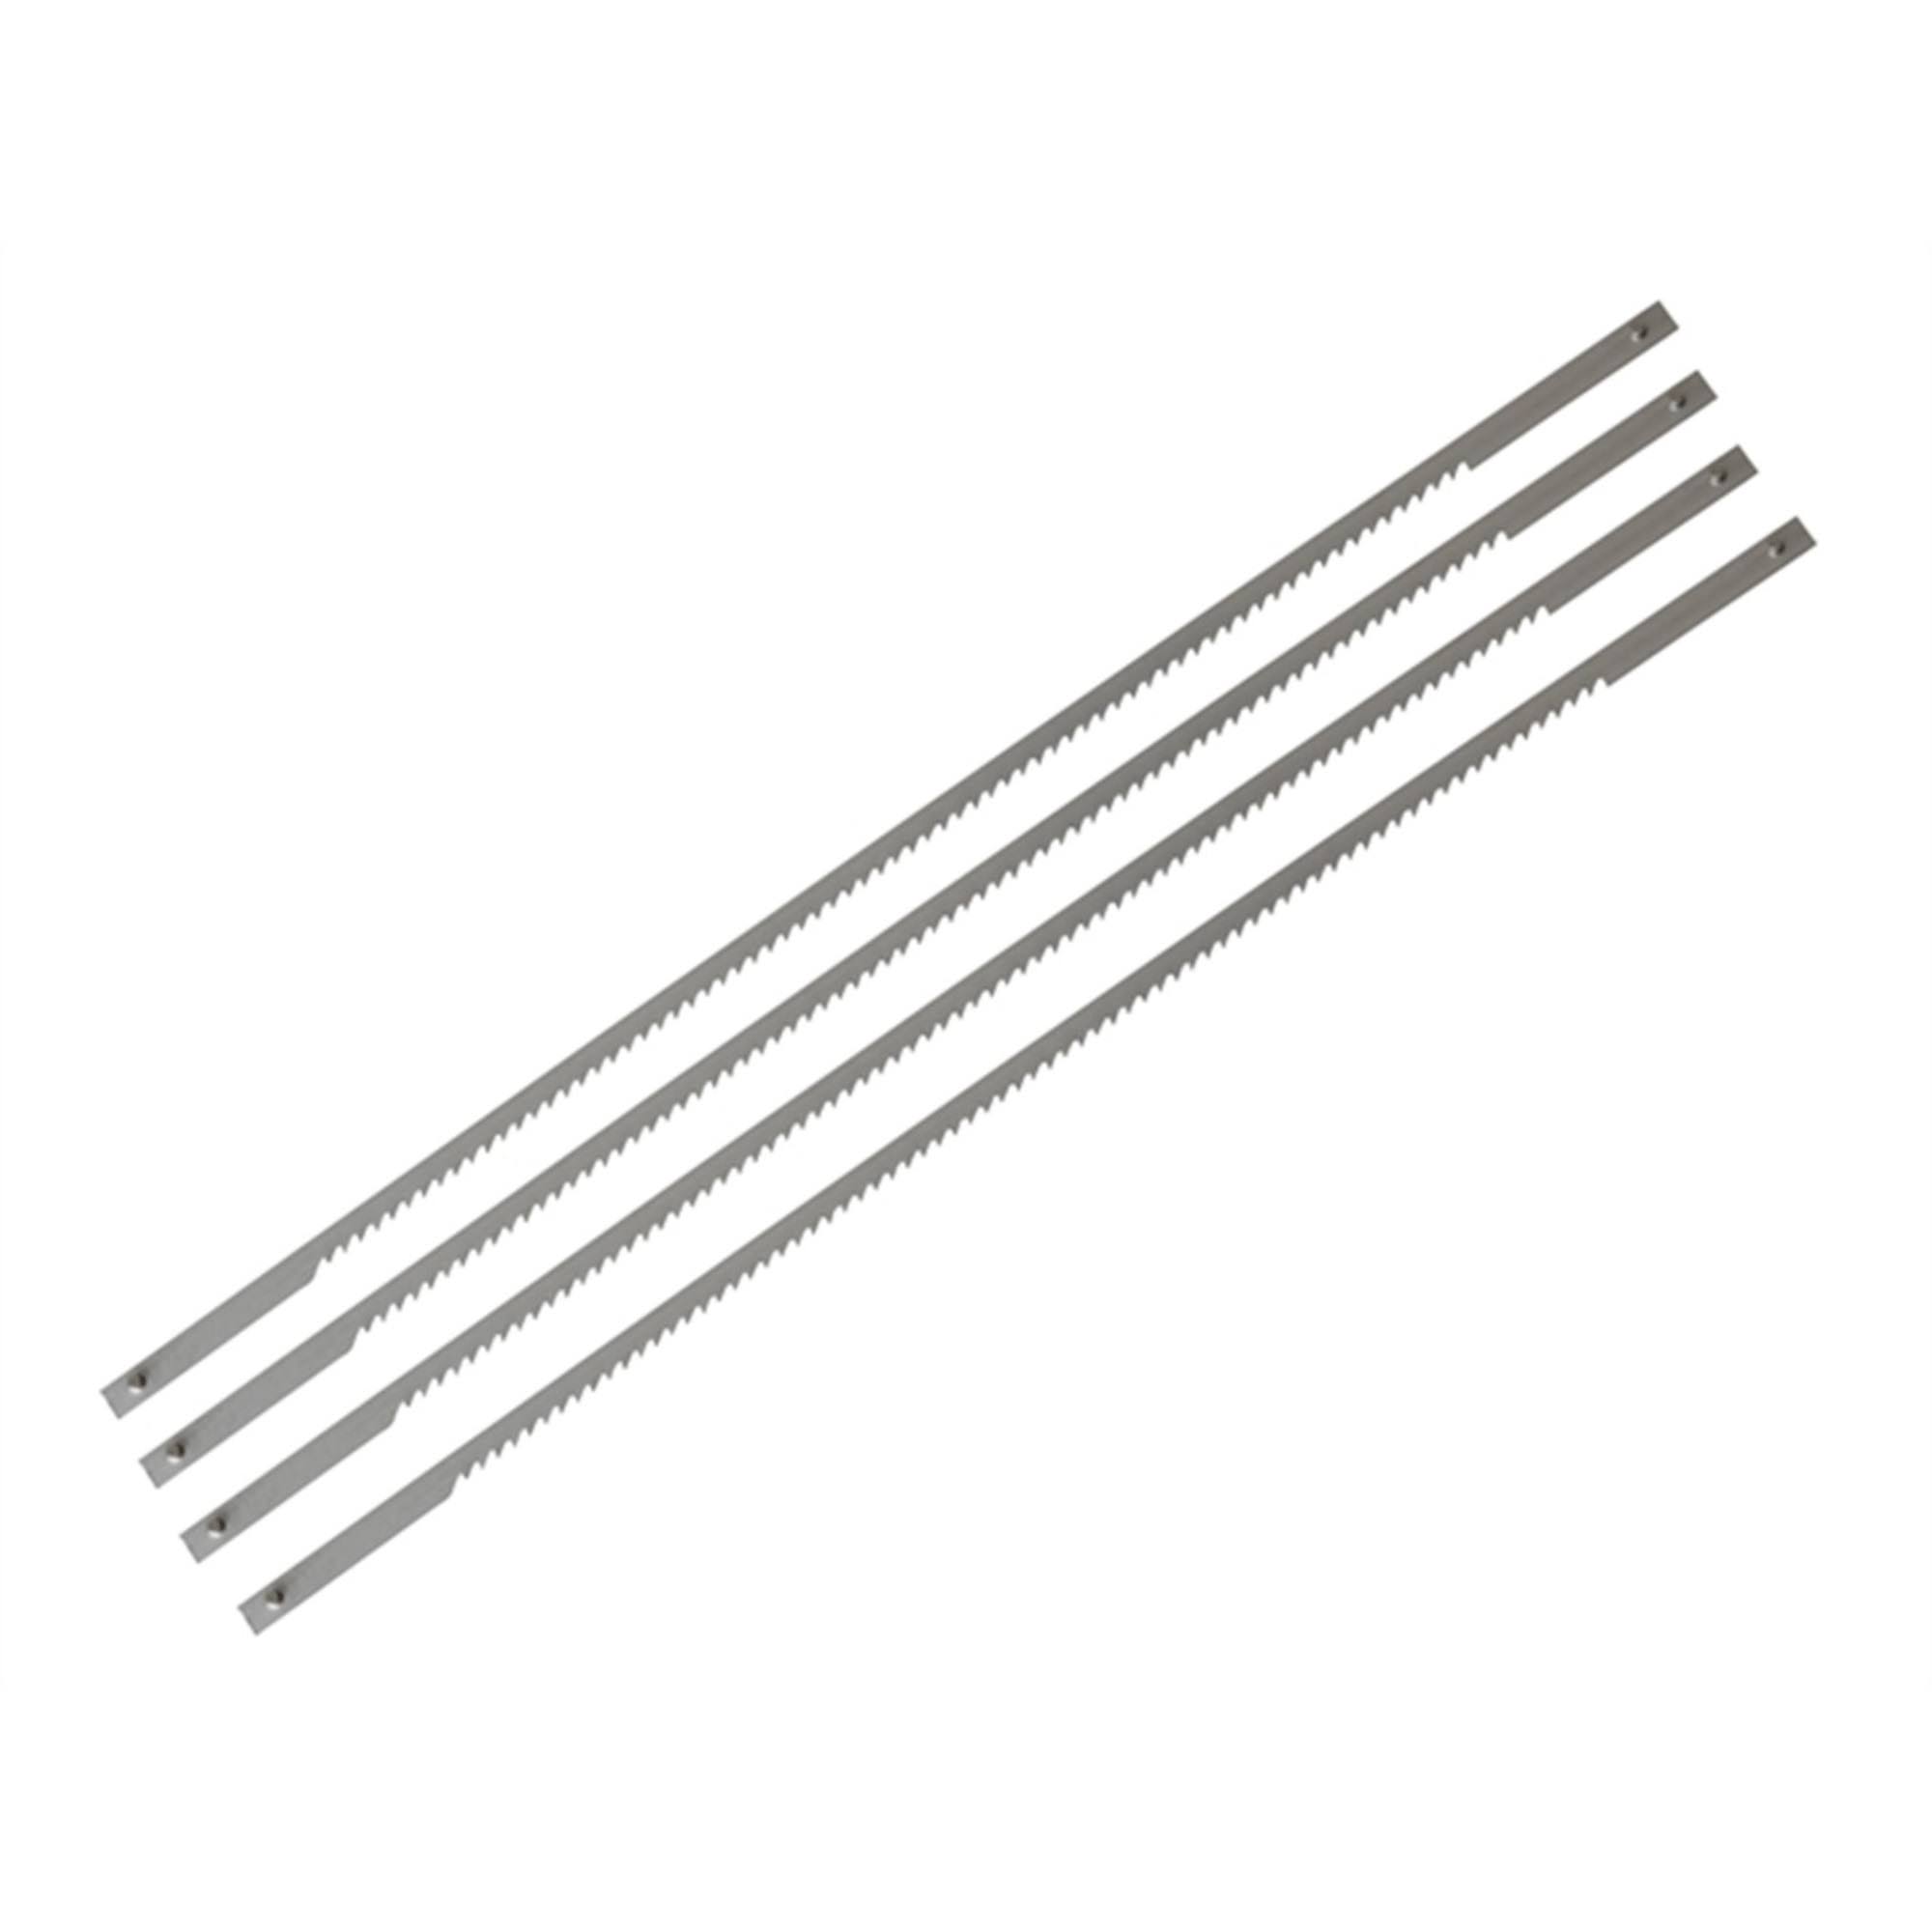 Stanley Tools Coping Saw Blades - 4 Pack